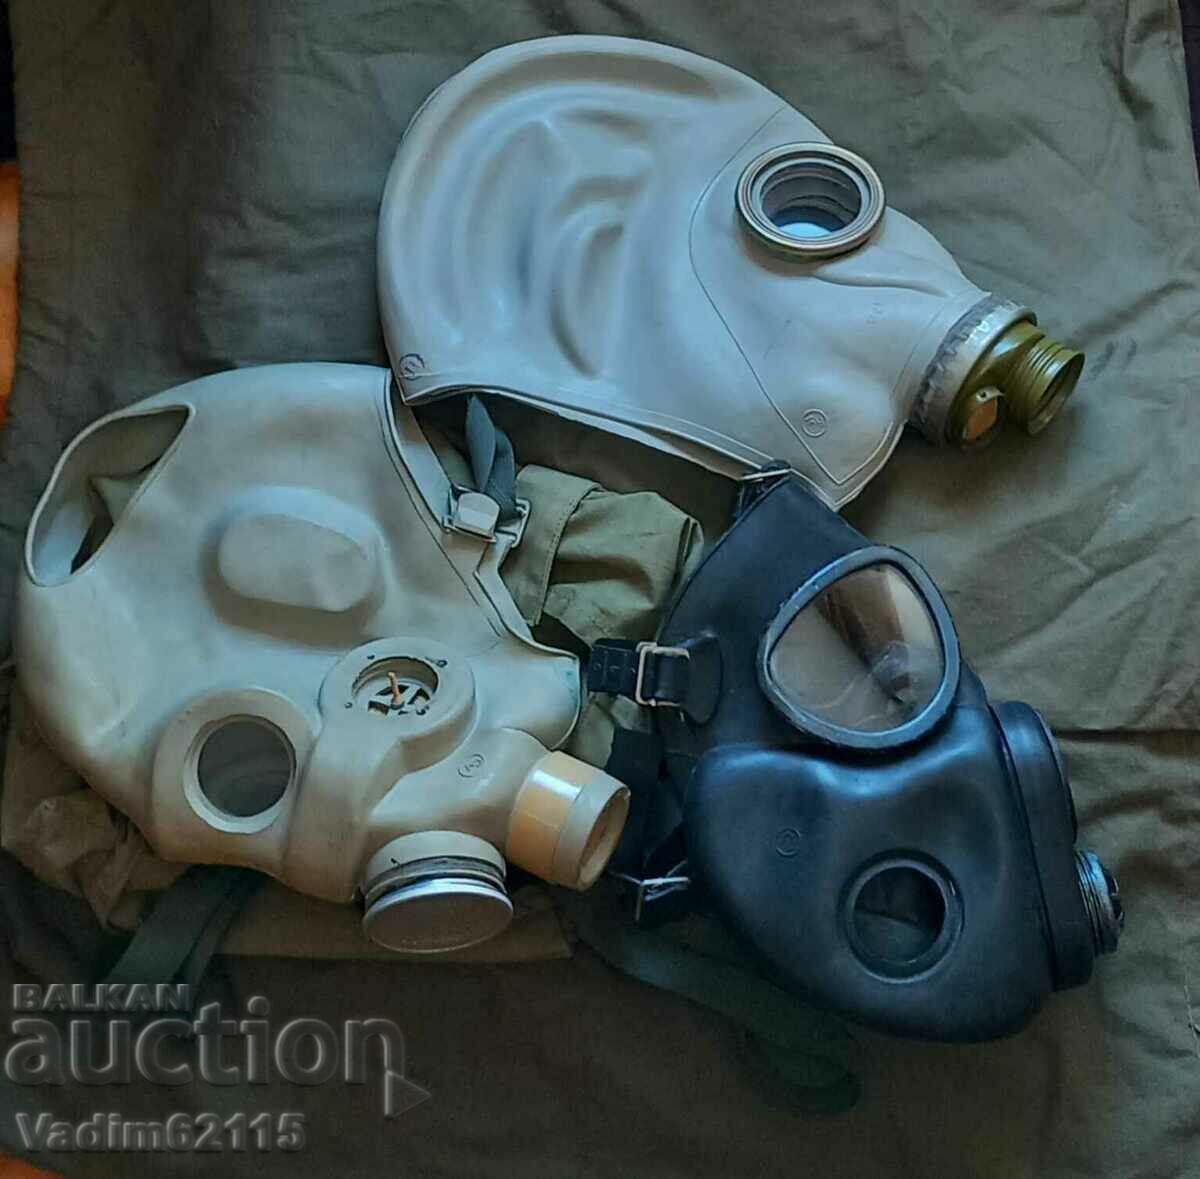 Face parts for PMG, PDE and GP-5 gas masks